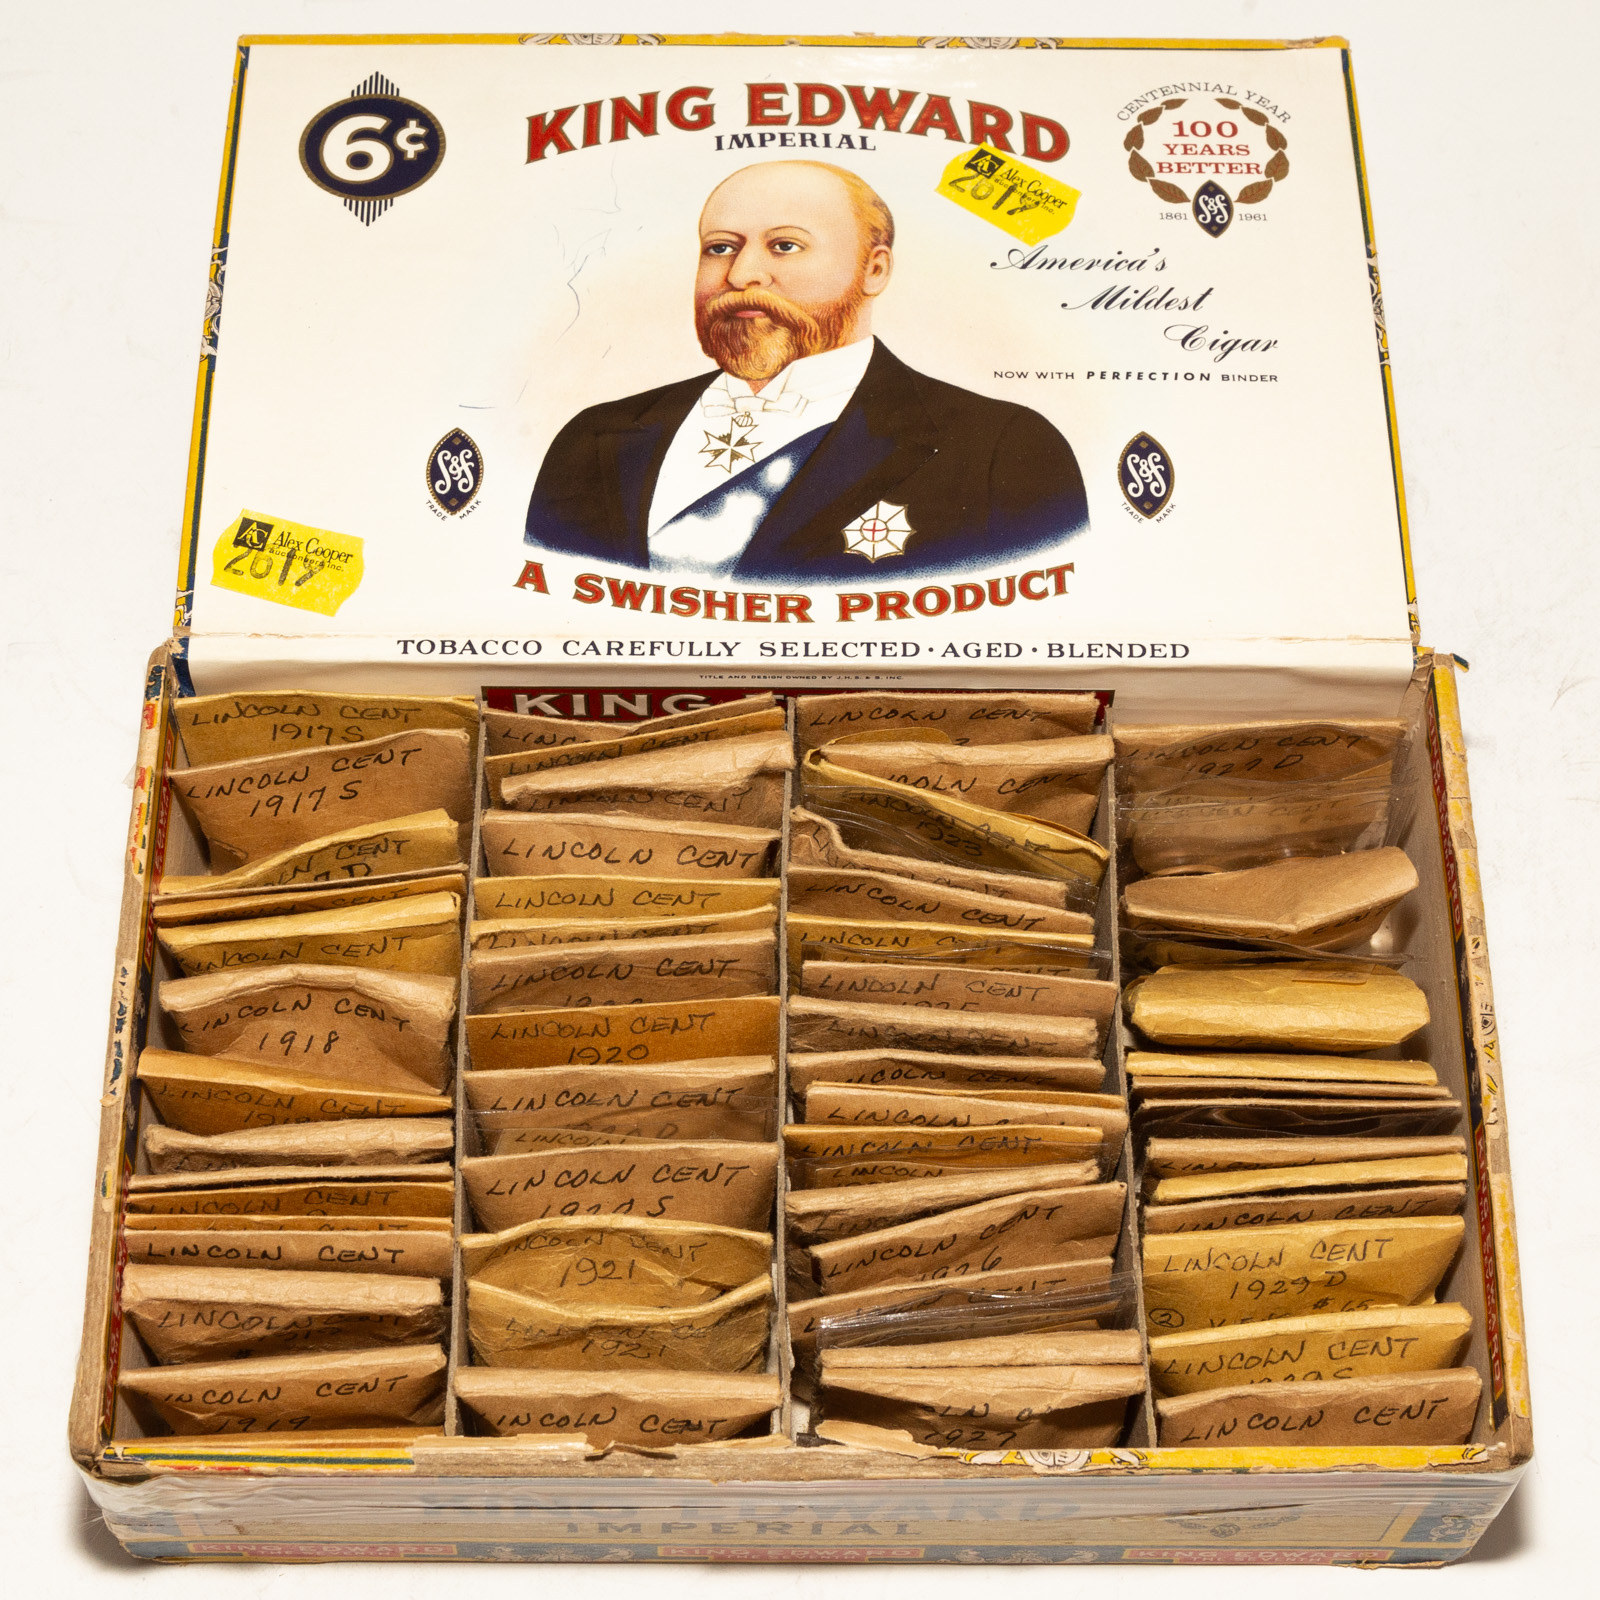 CIGAR BOX WITH ENVELOPED LINCOLN 2eab49